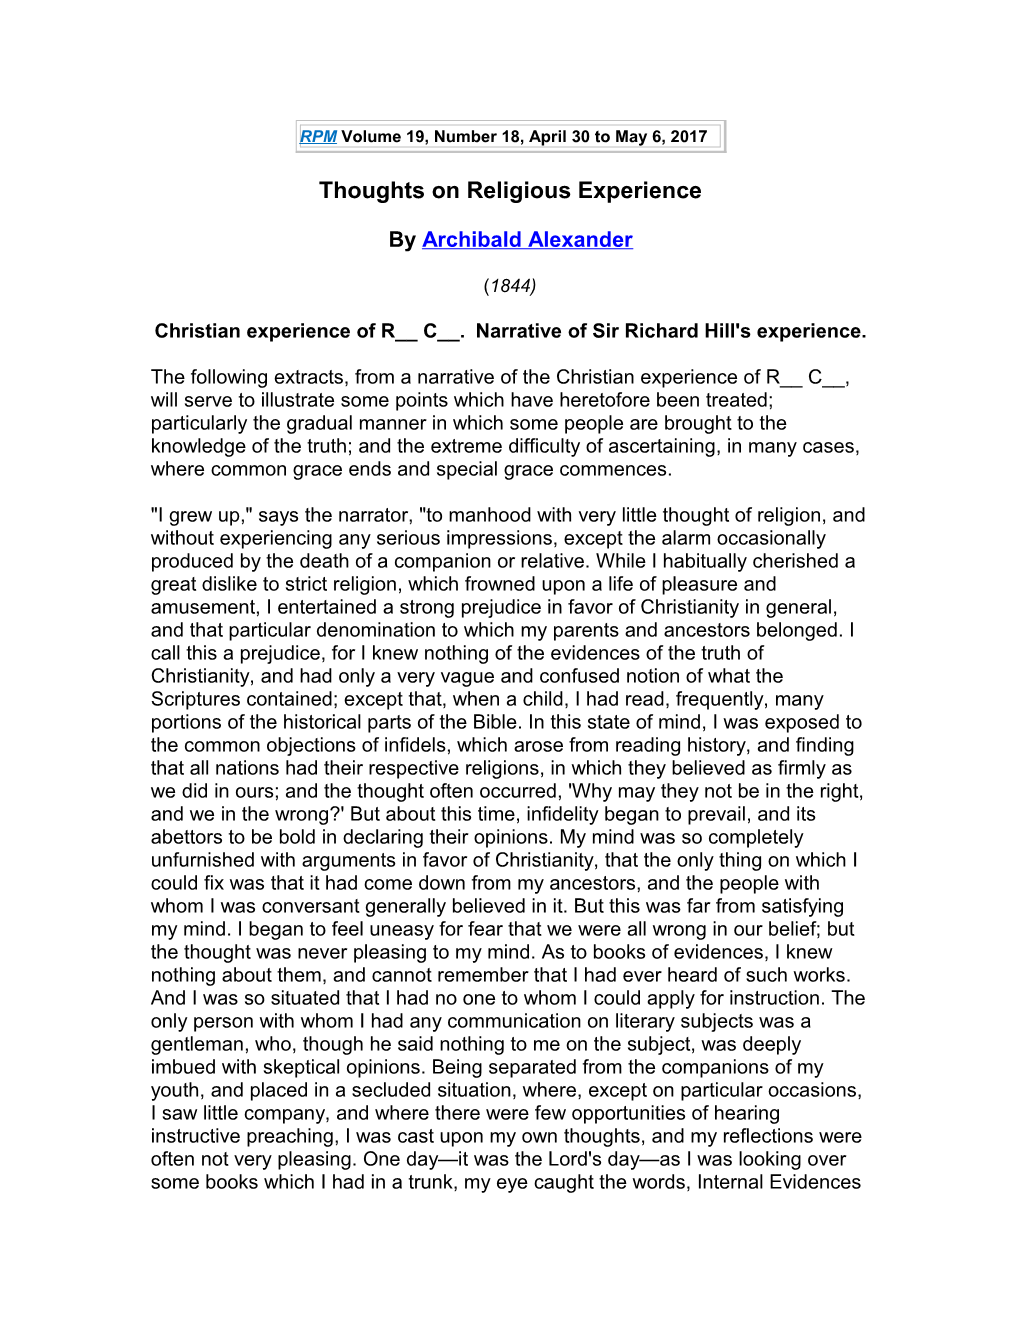 Christian Experience of R__ C__.Narrative of Sir Richard Hill's Experience